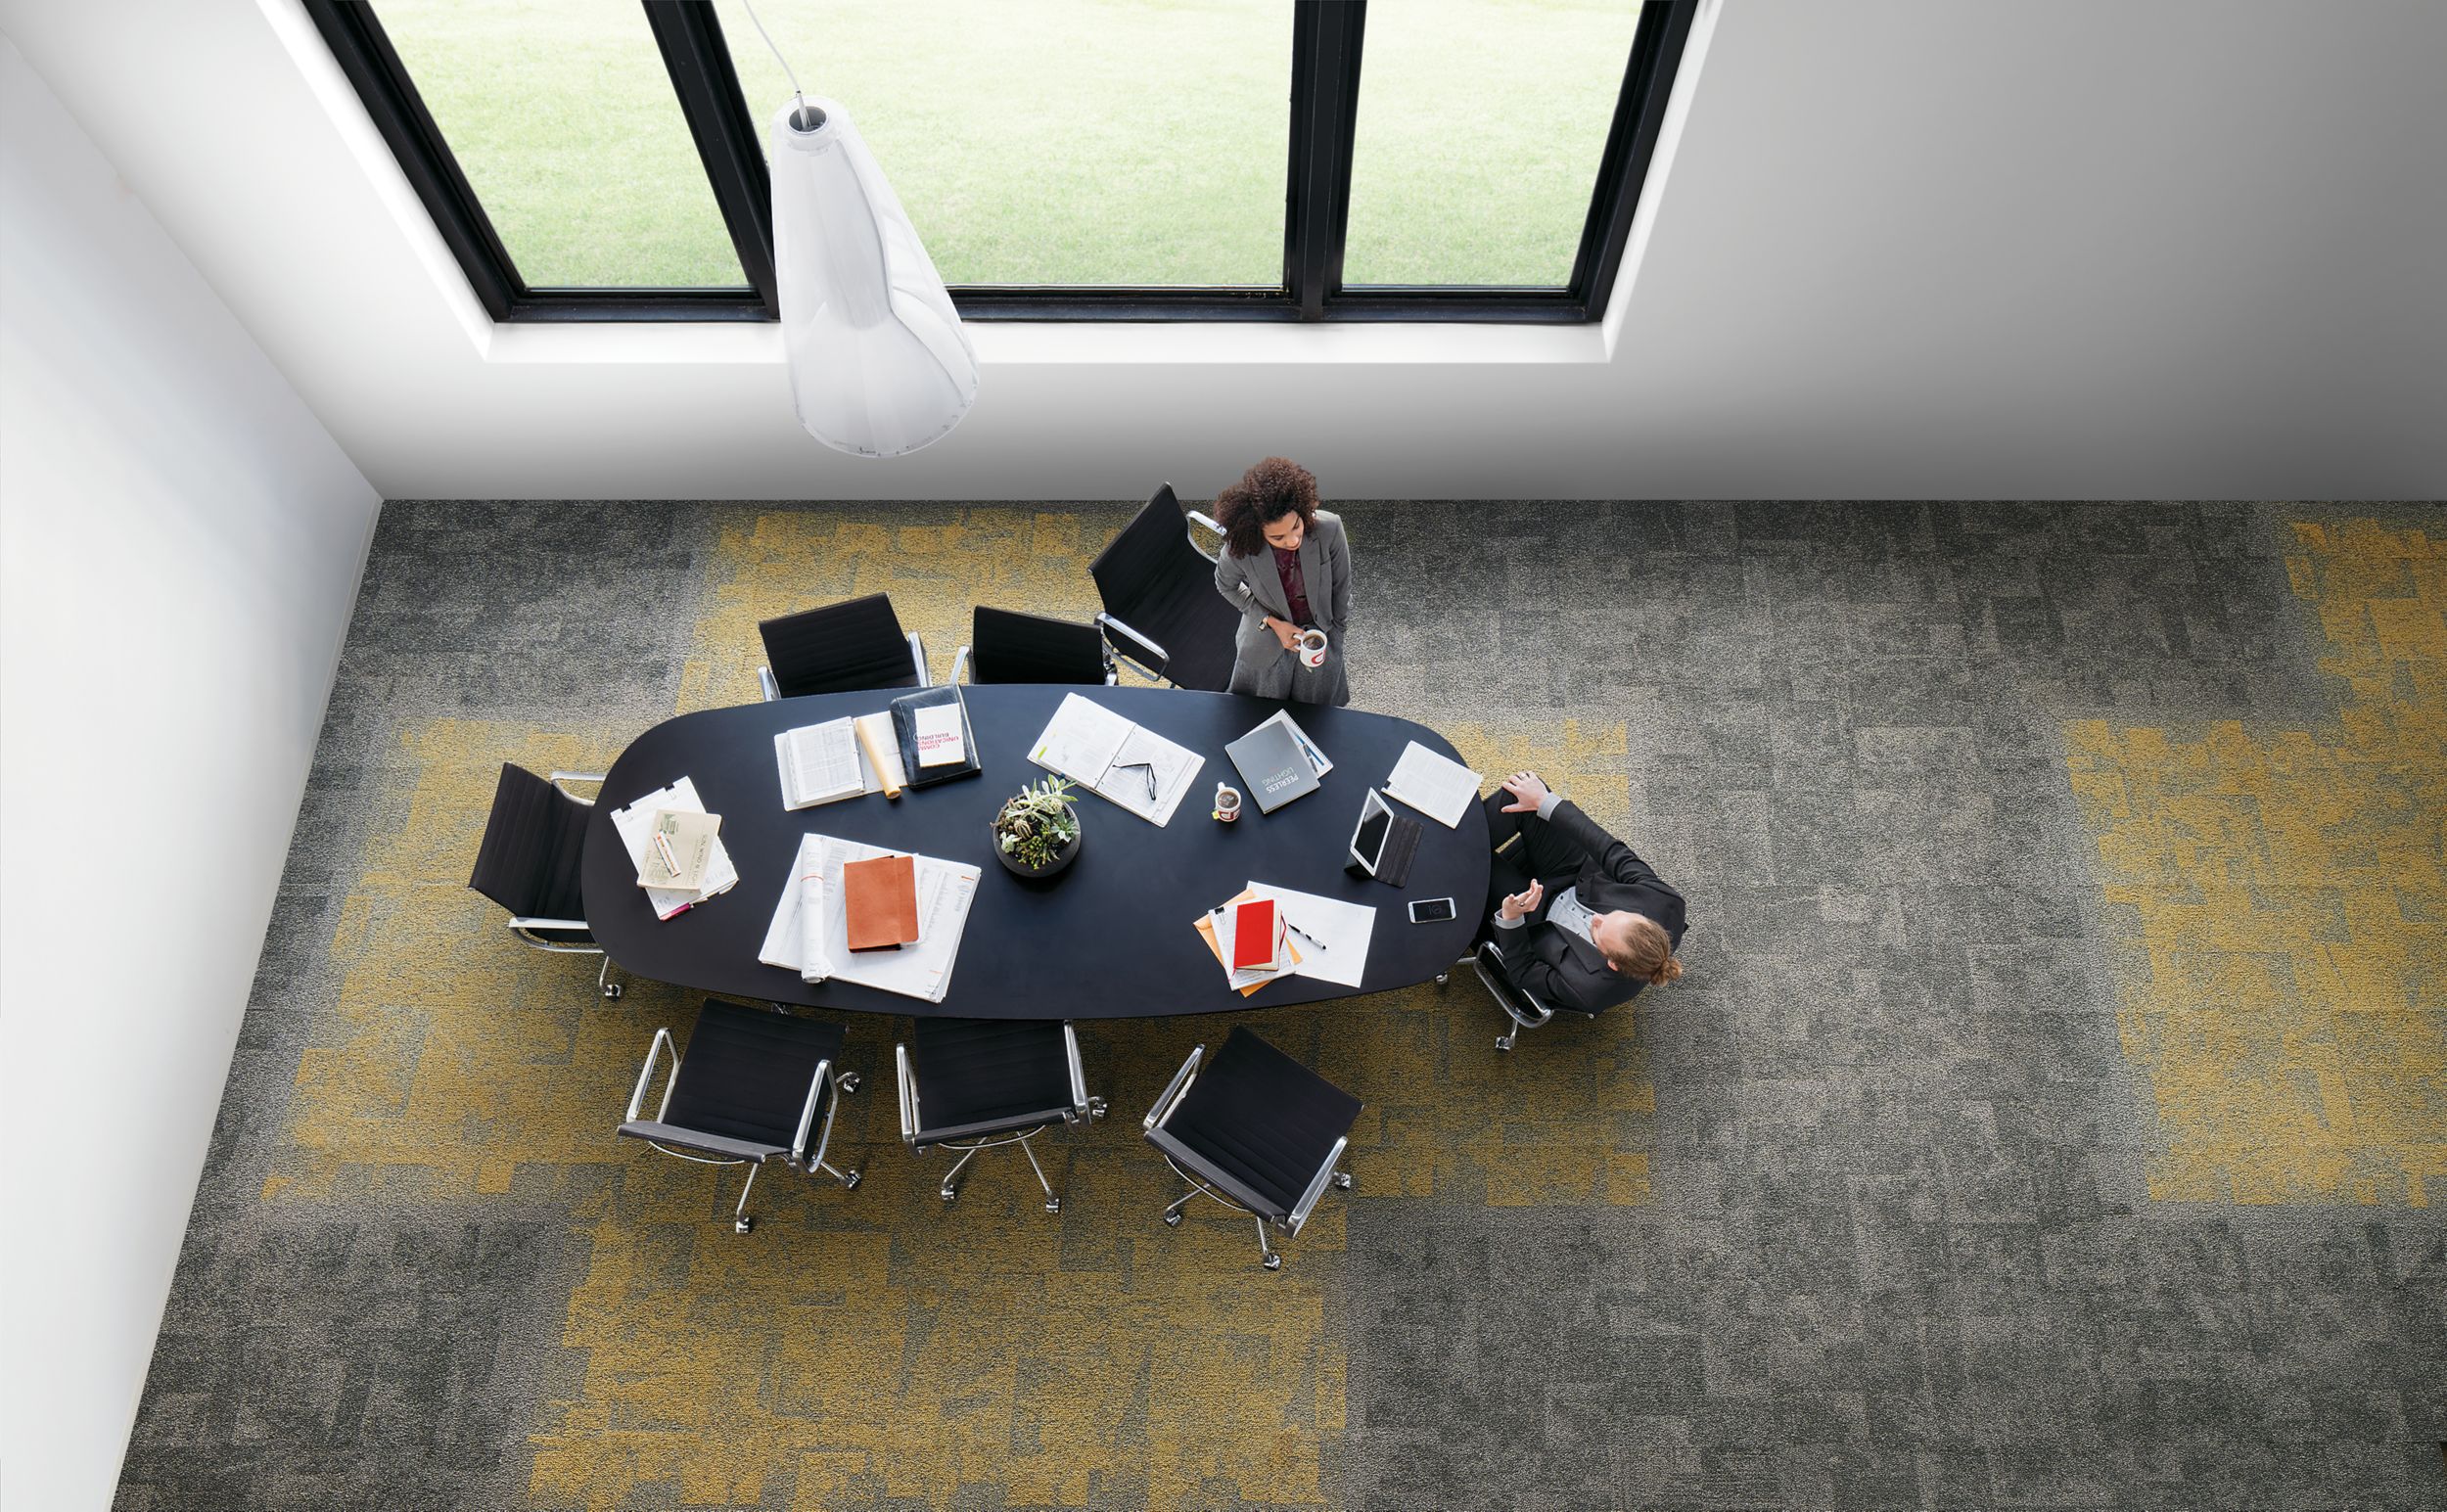 Interface Open Air 404 carpet tile in overhead view of meeting table with man and woman talking and drinking coffee Bildnummer 3